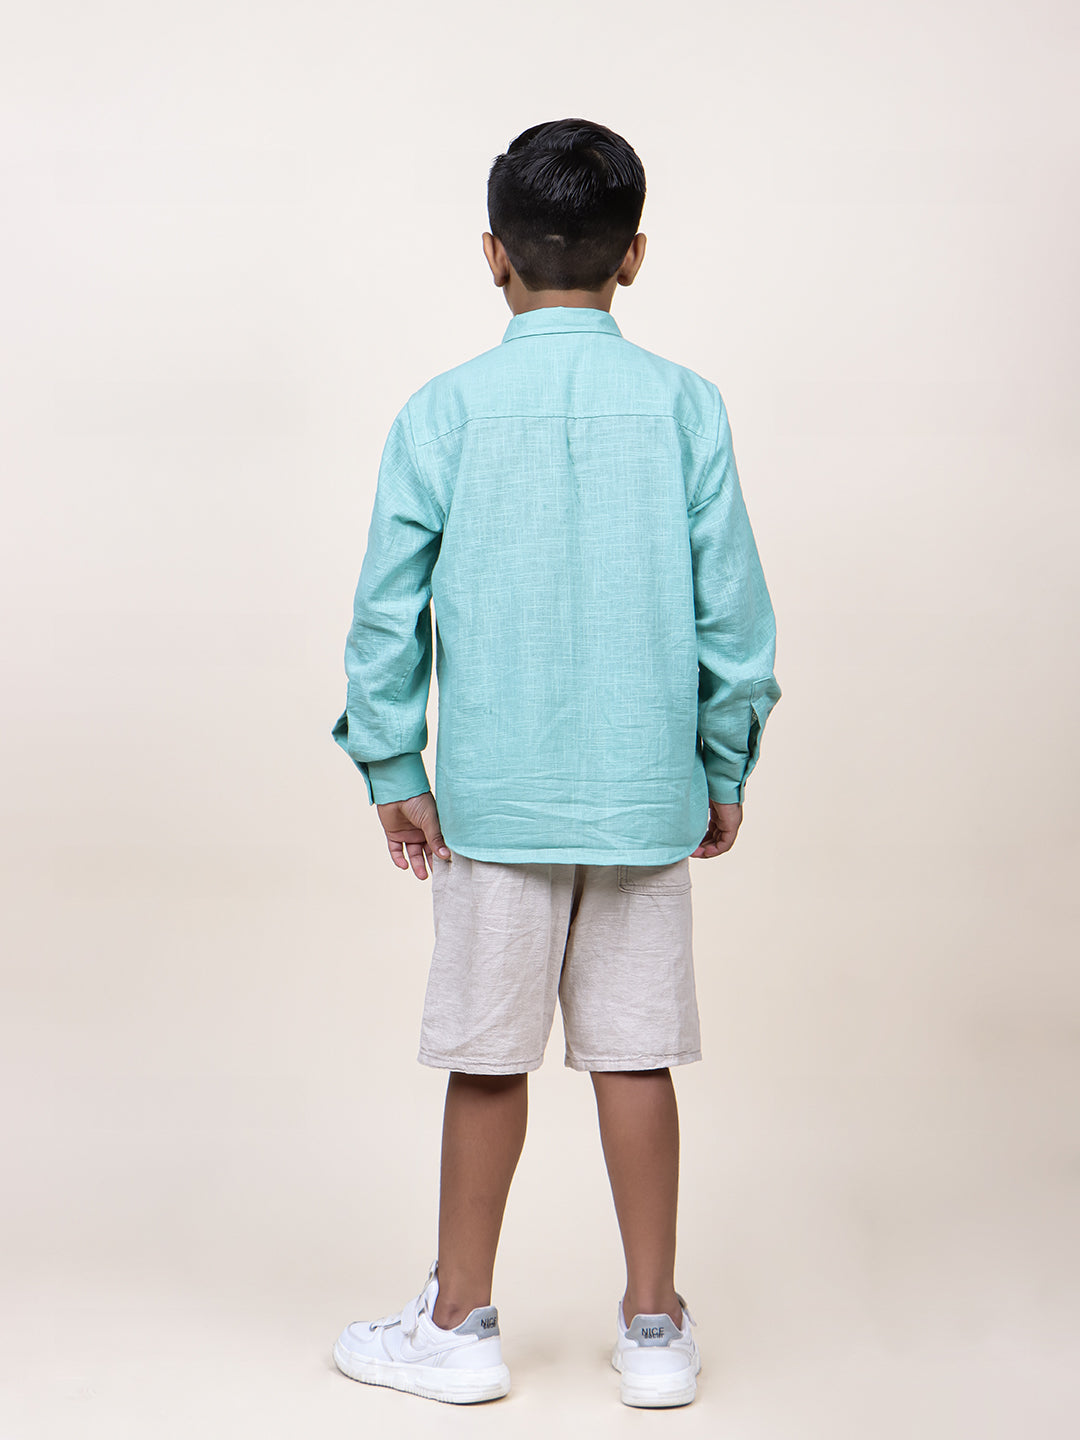 Boys Blue Colorblocked rolled up Cotton Shirt